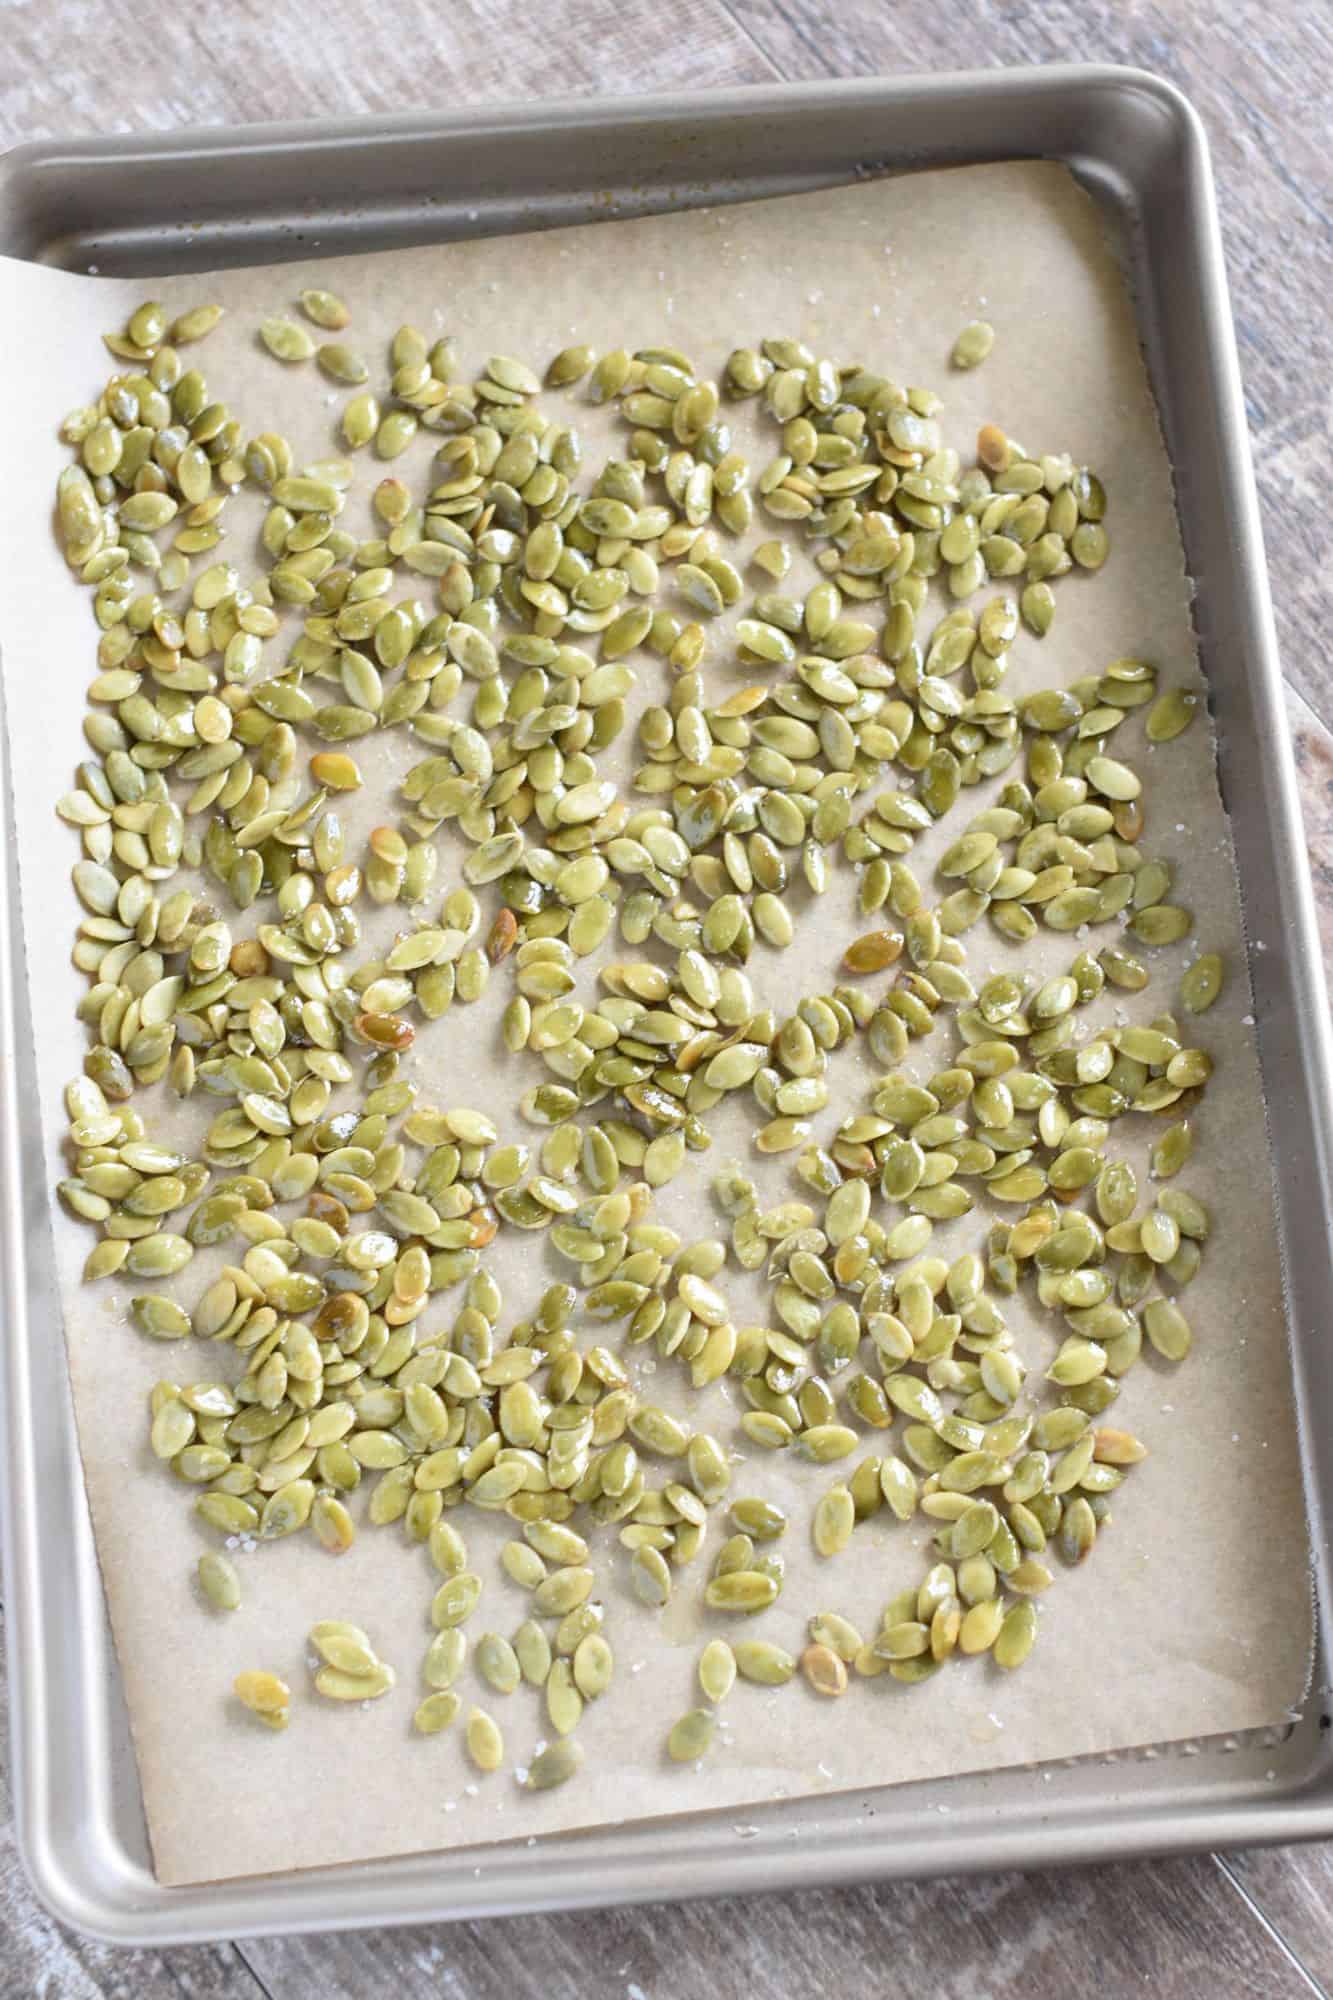 Raw pepitas spread around on the baking sheet after being spritzed with avocado oil and salted